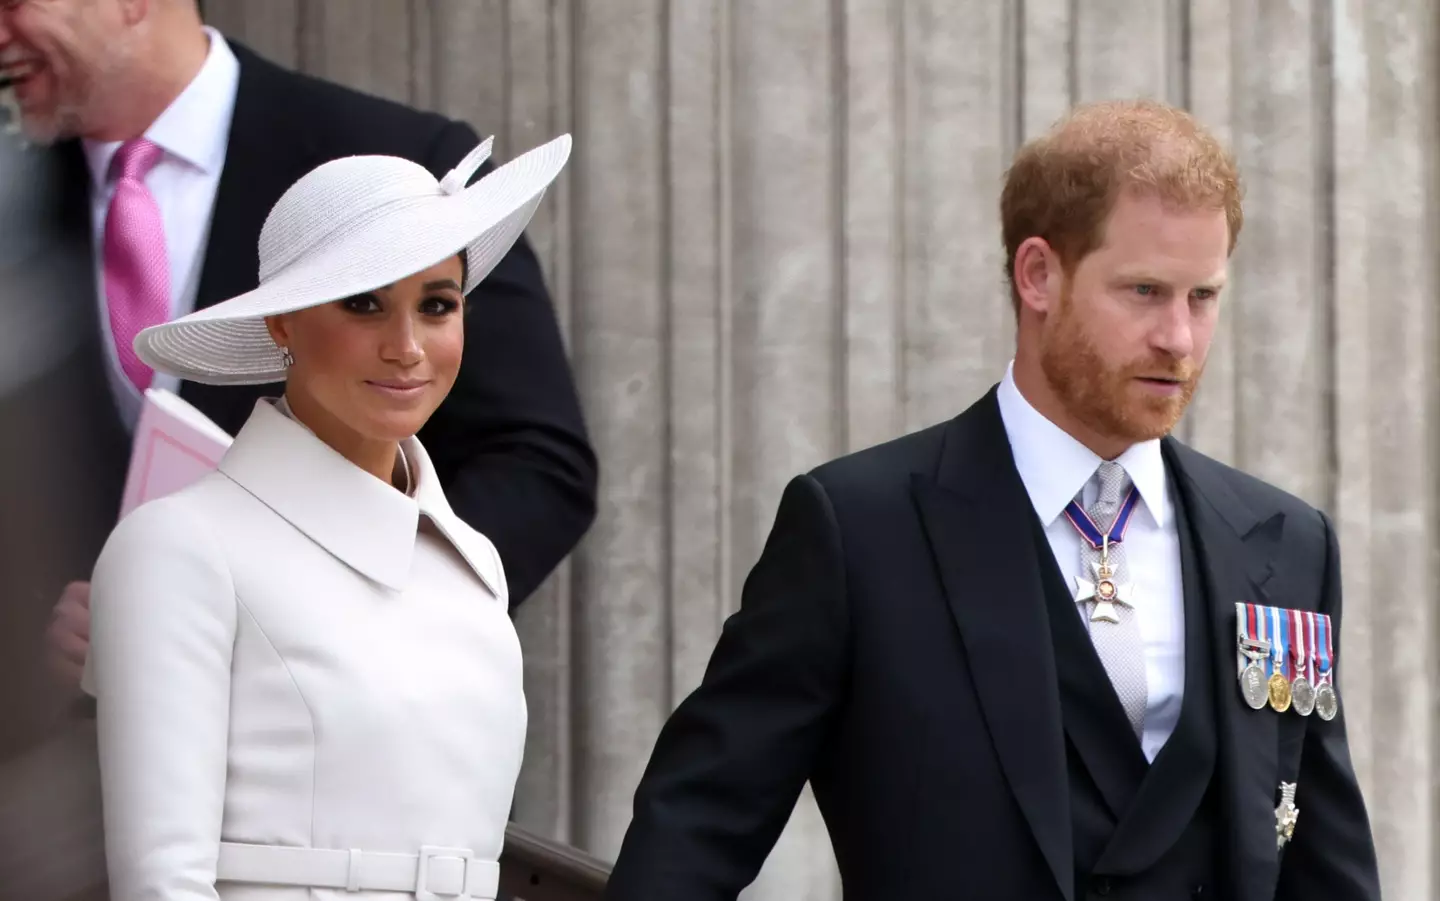 Meghan Markle and Prince Harry returned to the UK last week for the Queen's Platinum Jubilee.